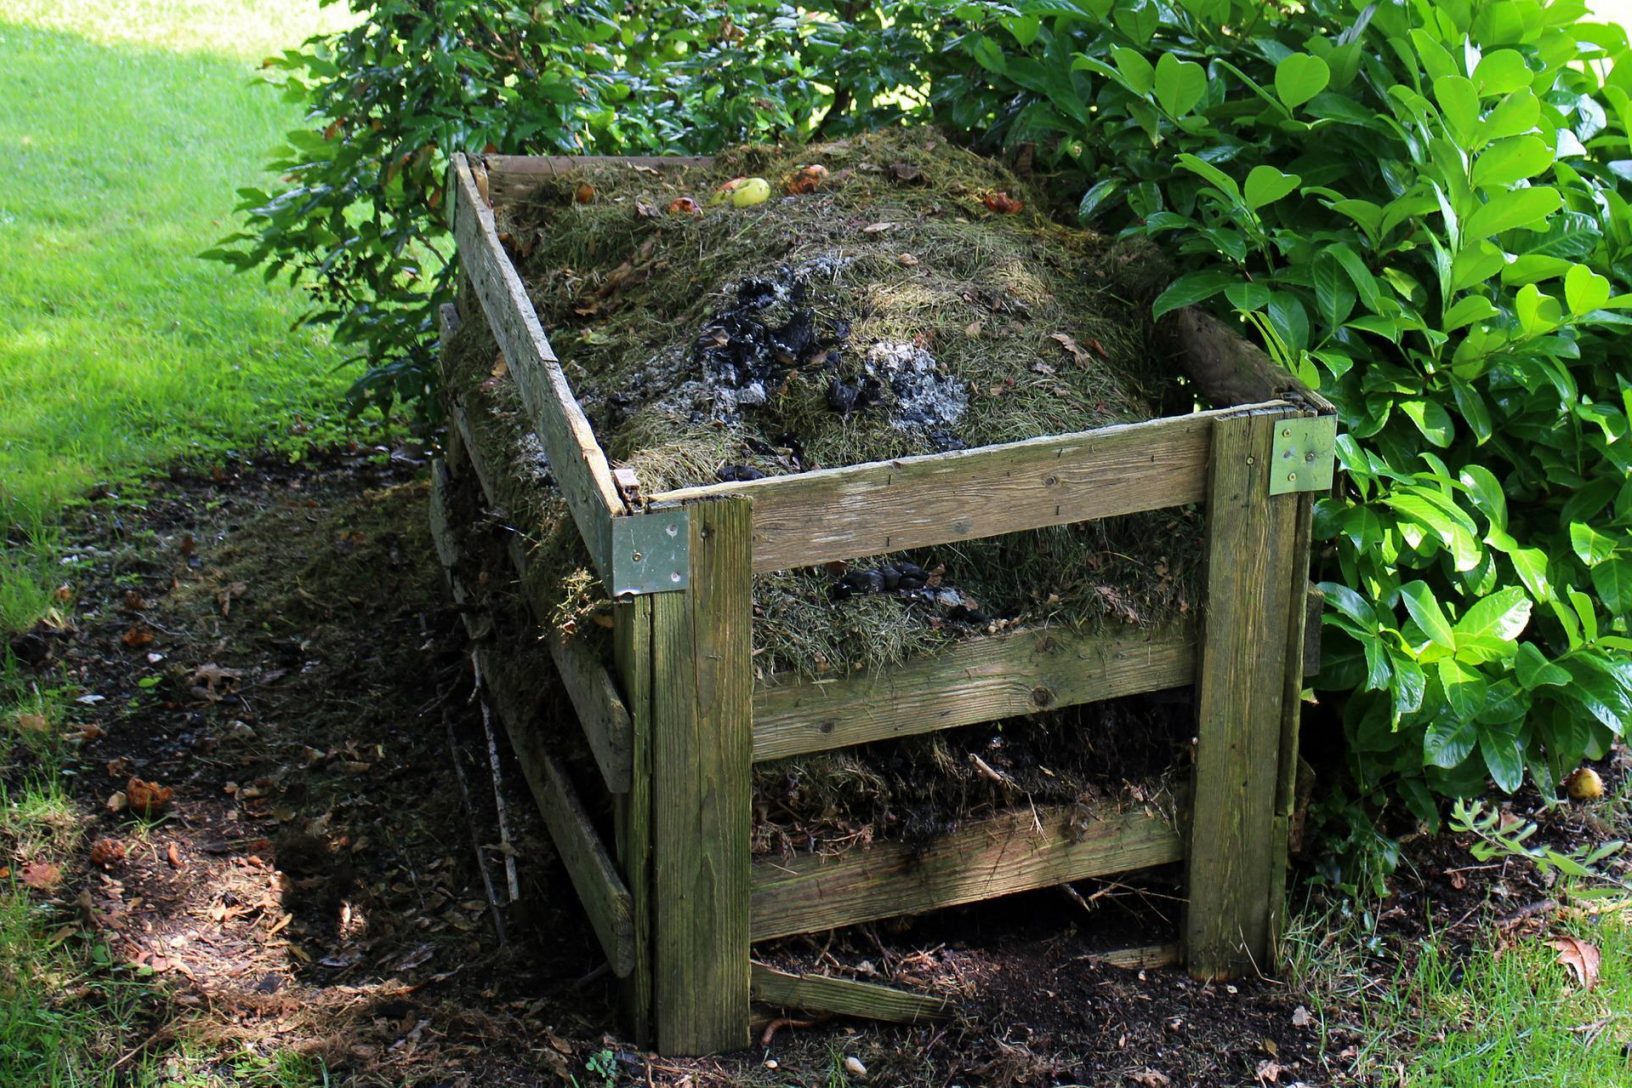 Compost in a wooden frame compost bin